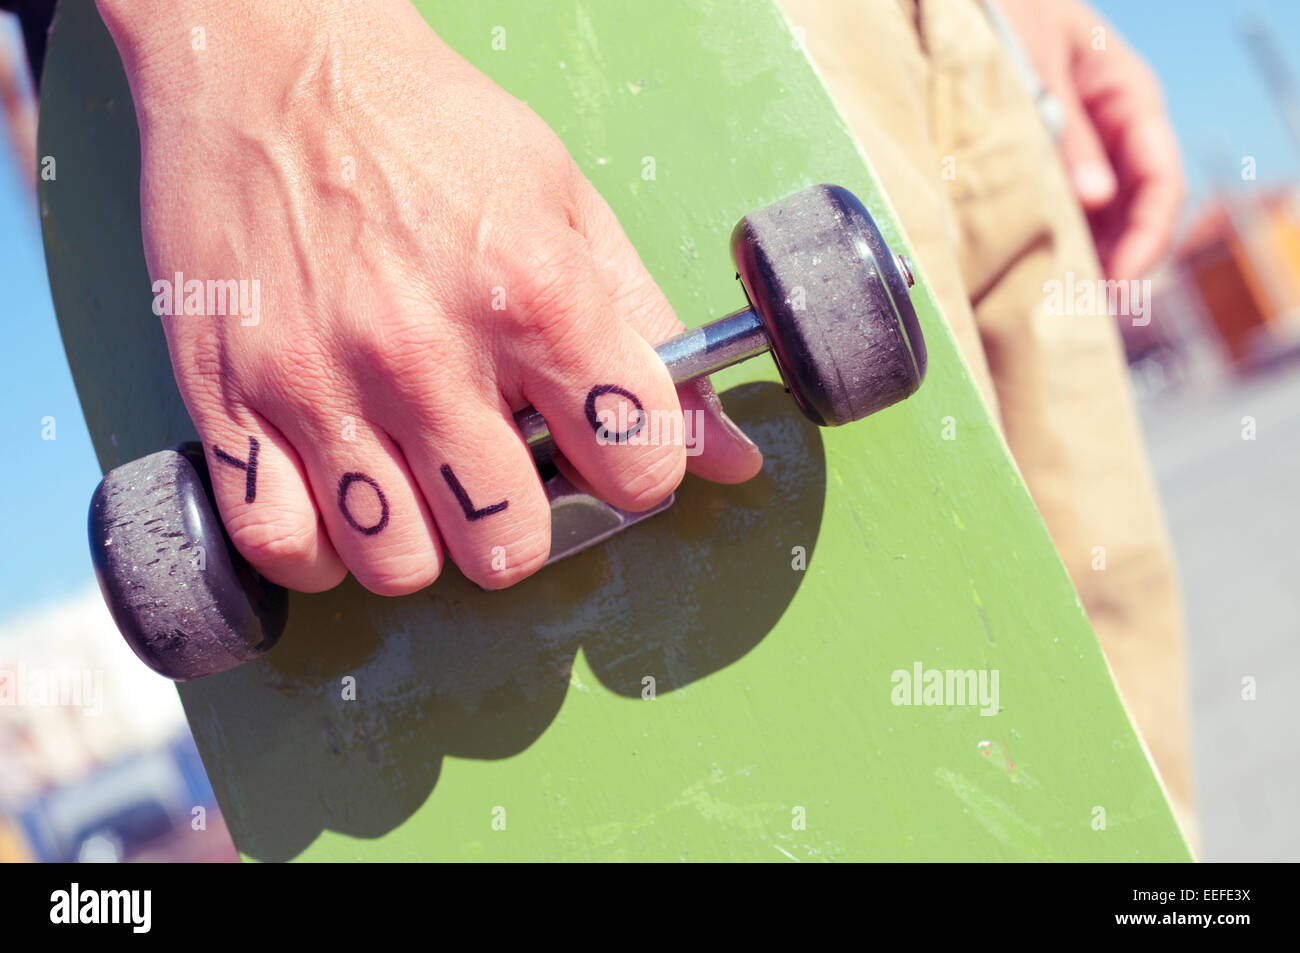 closeup of a young man with the word yolo, for you only live once, tattooed in his hand holds a skateboard Stock Photo